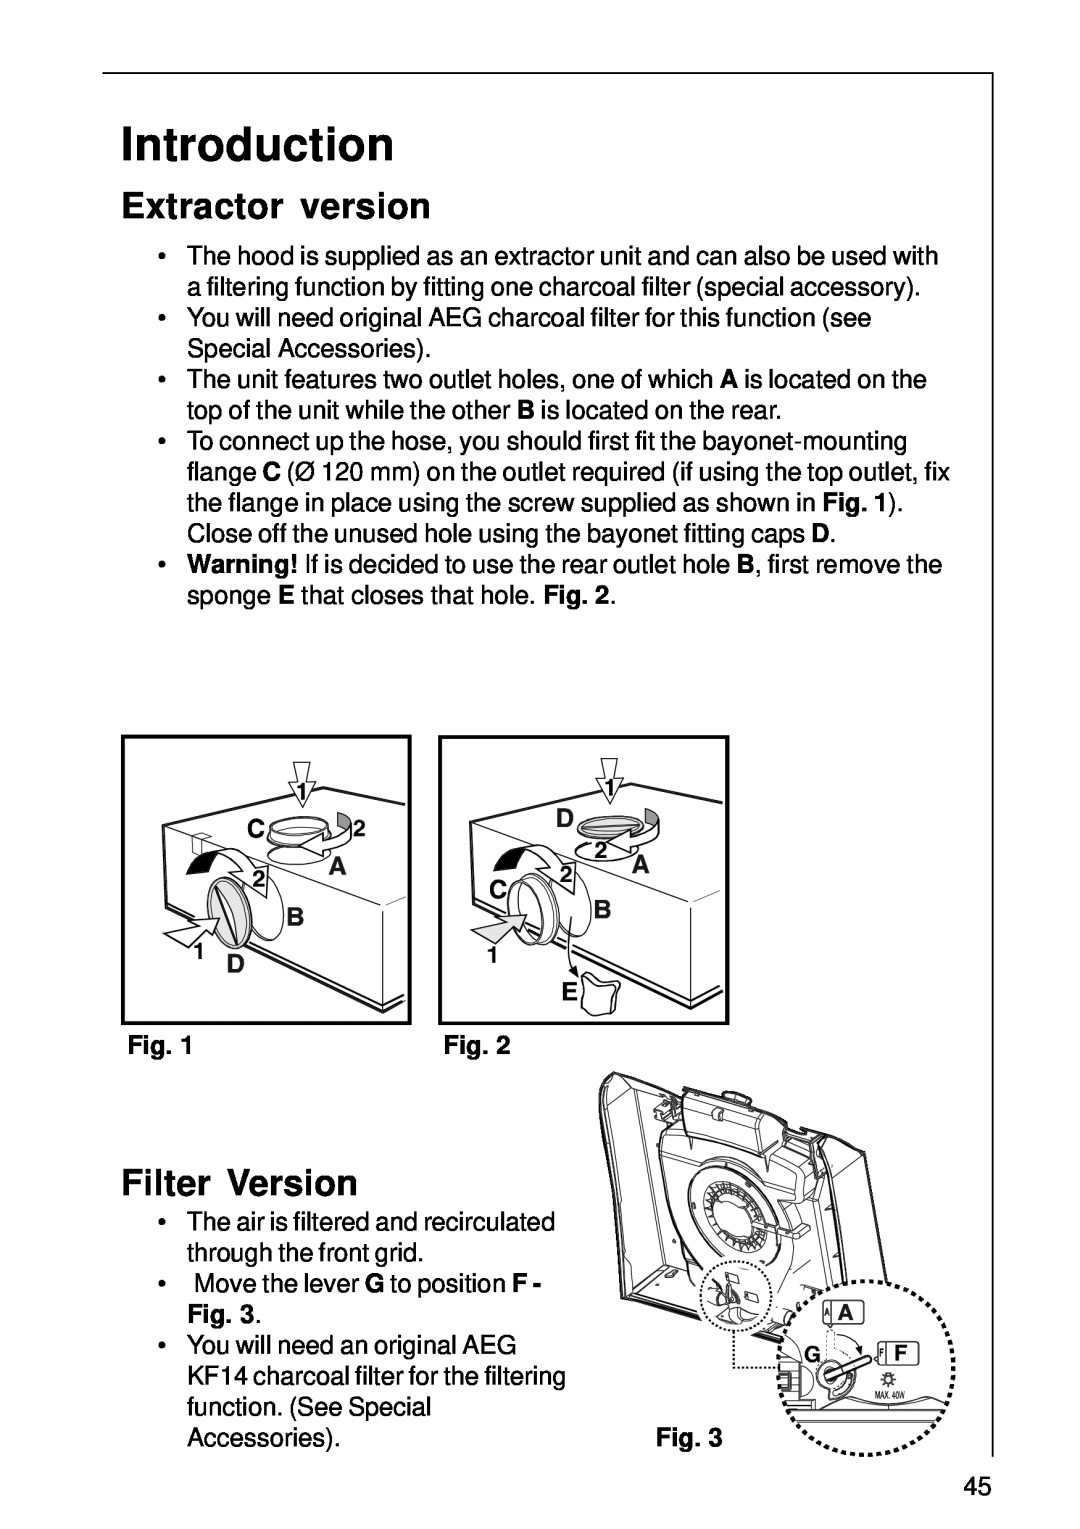 AEG 1400 D installation instructions Introduction, Extractor version, Filter Version 